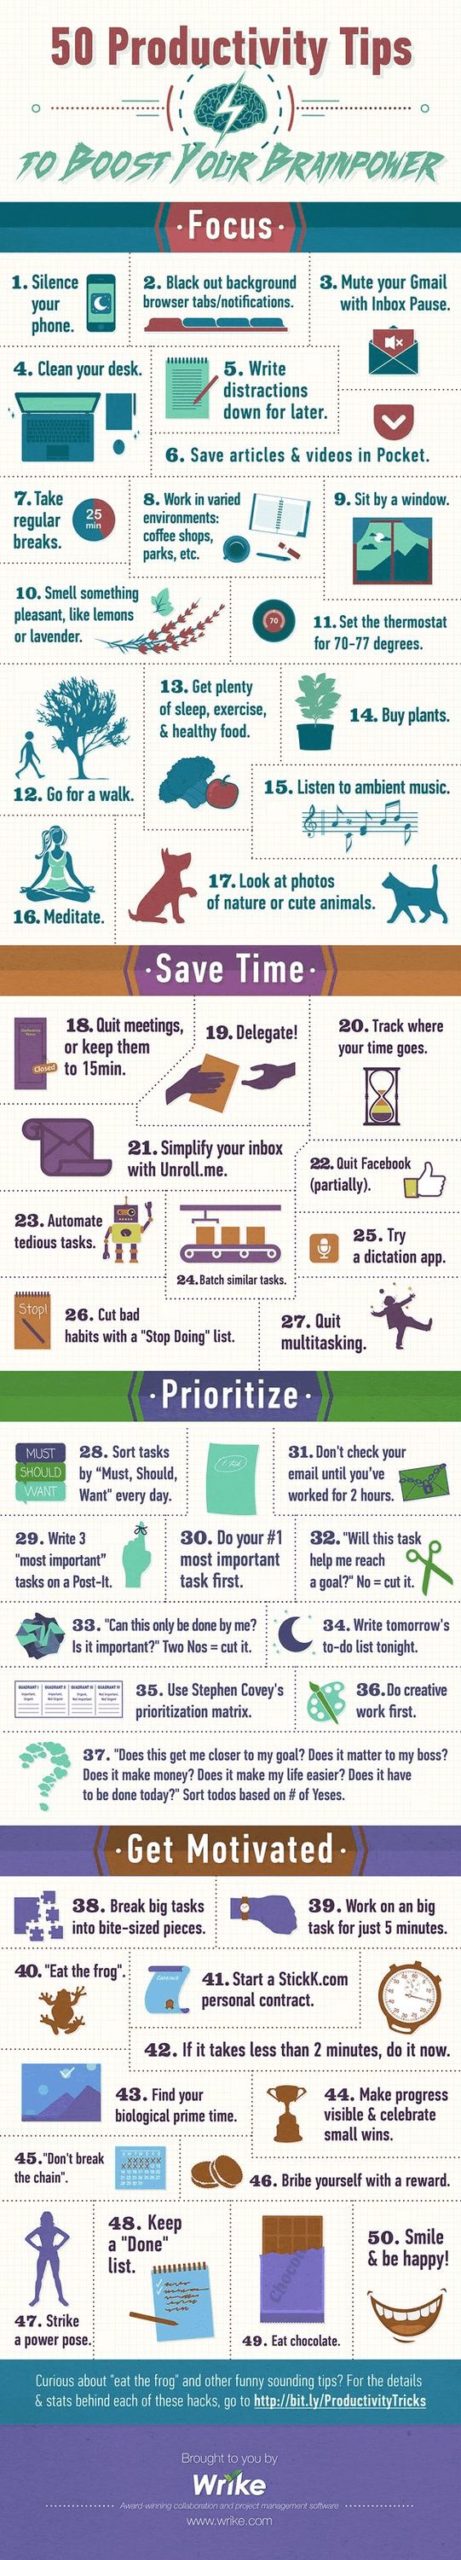 How to be productive productivity tips